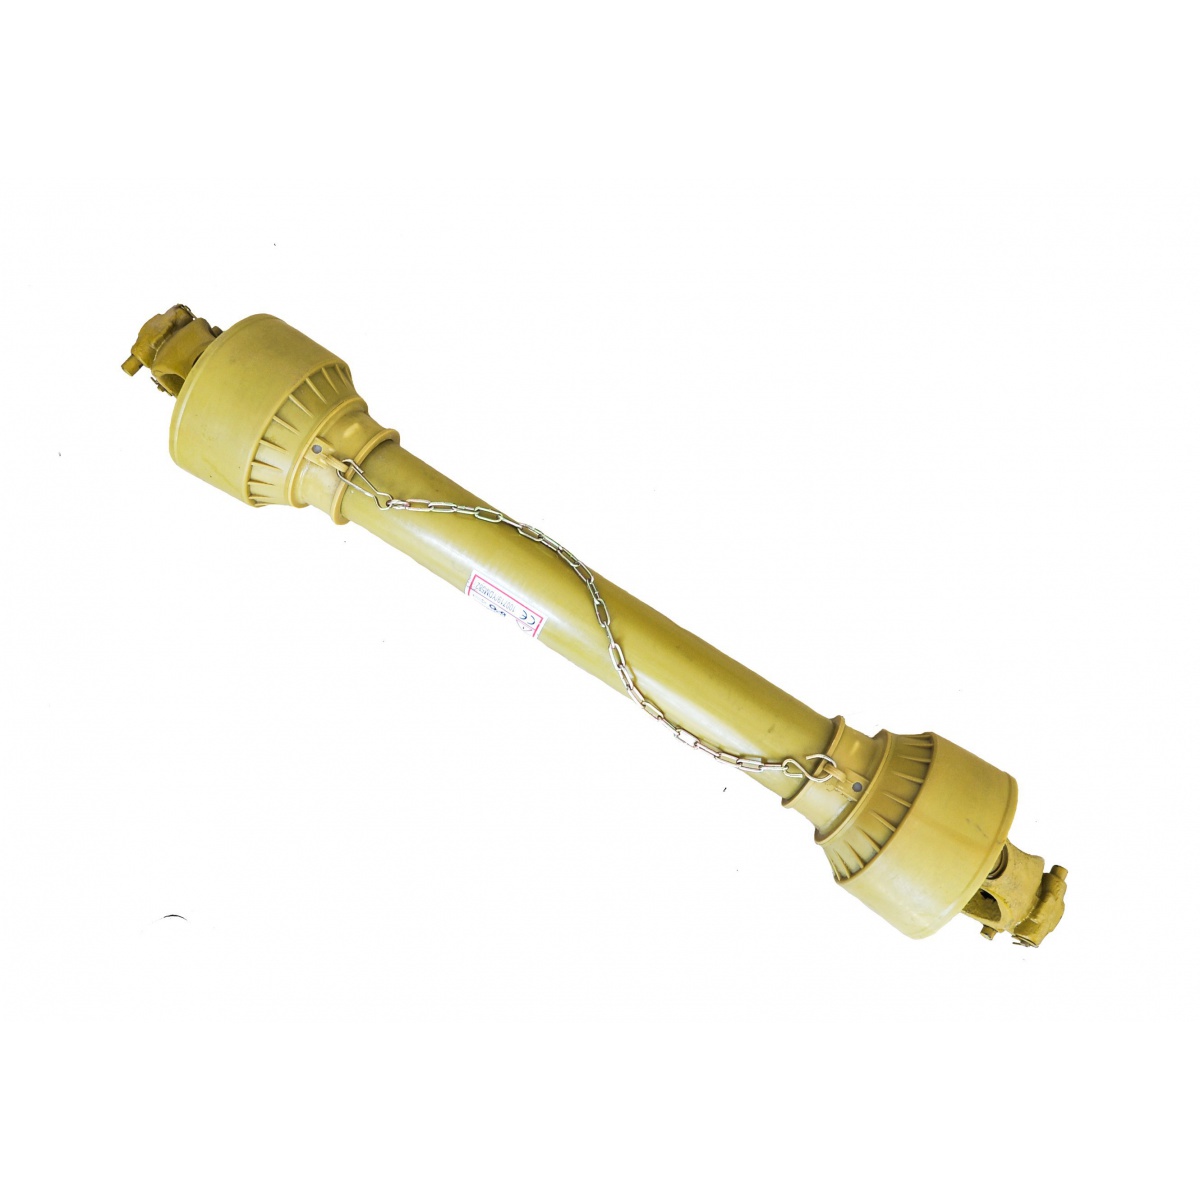 PTO shaft 07B - 60 cm / up to 105 HP